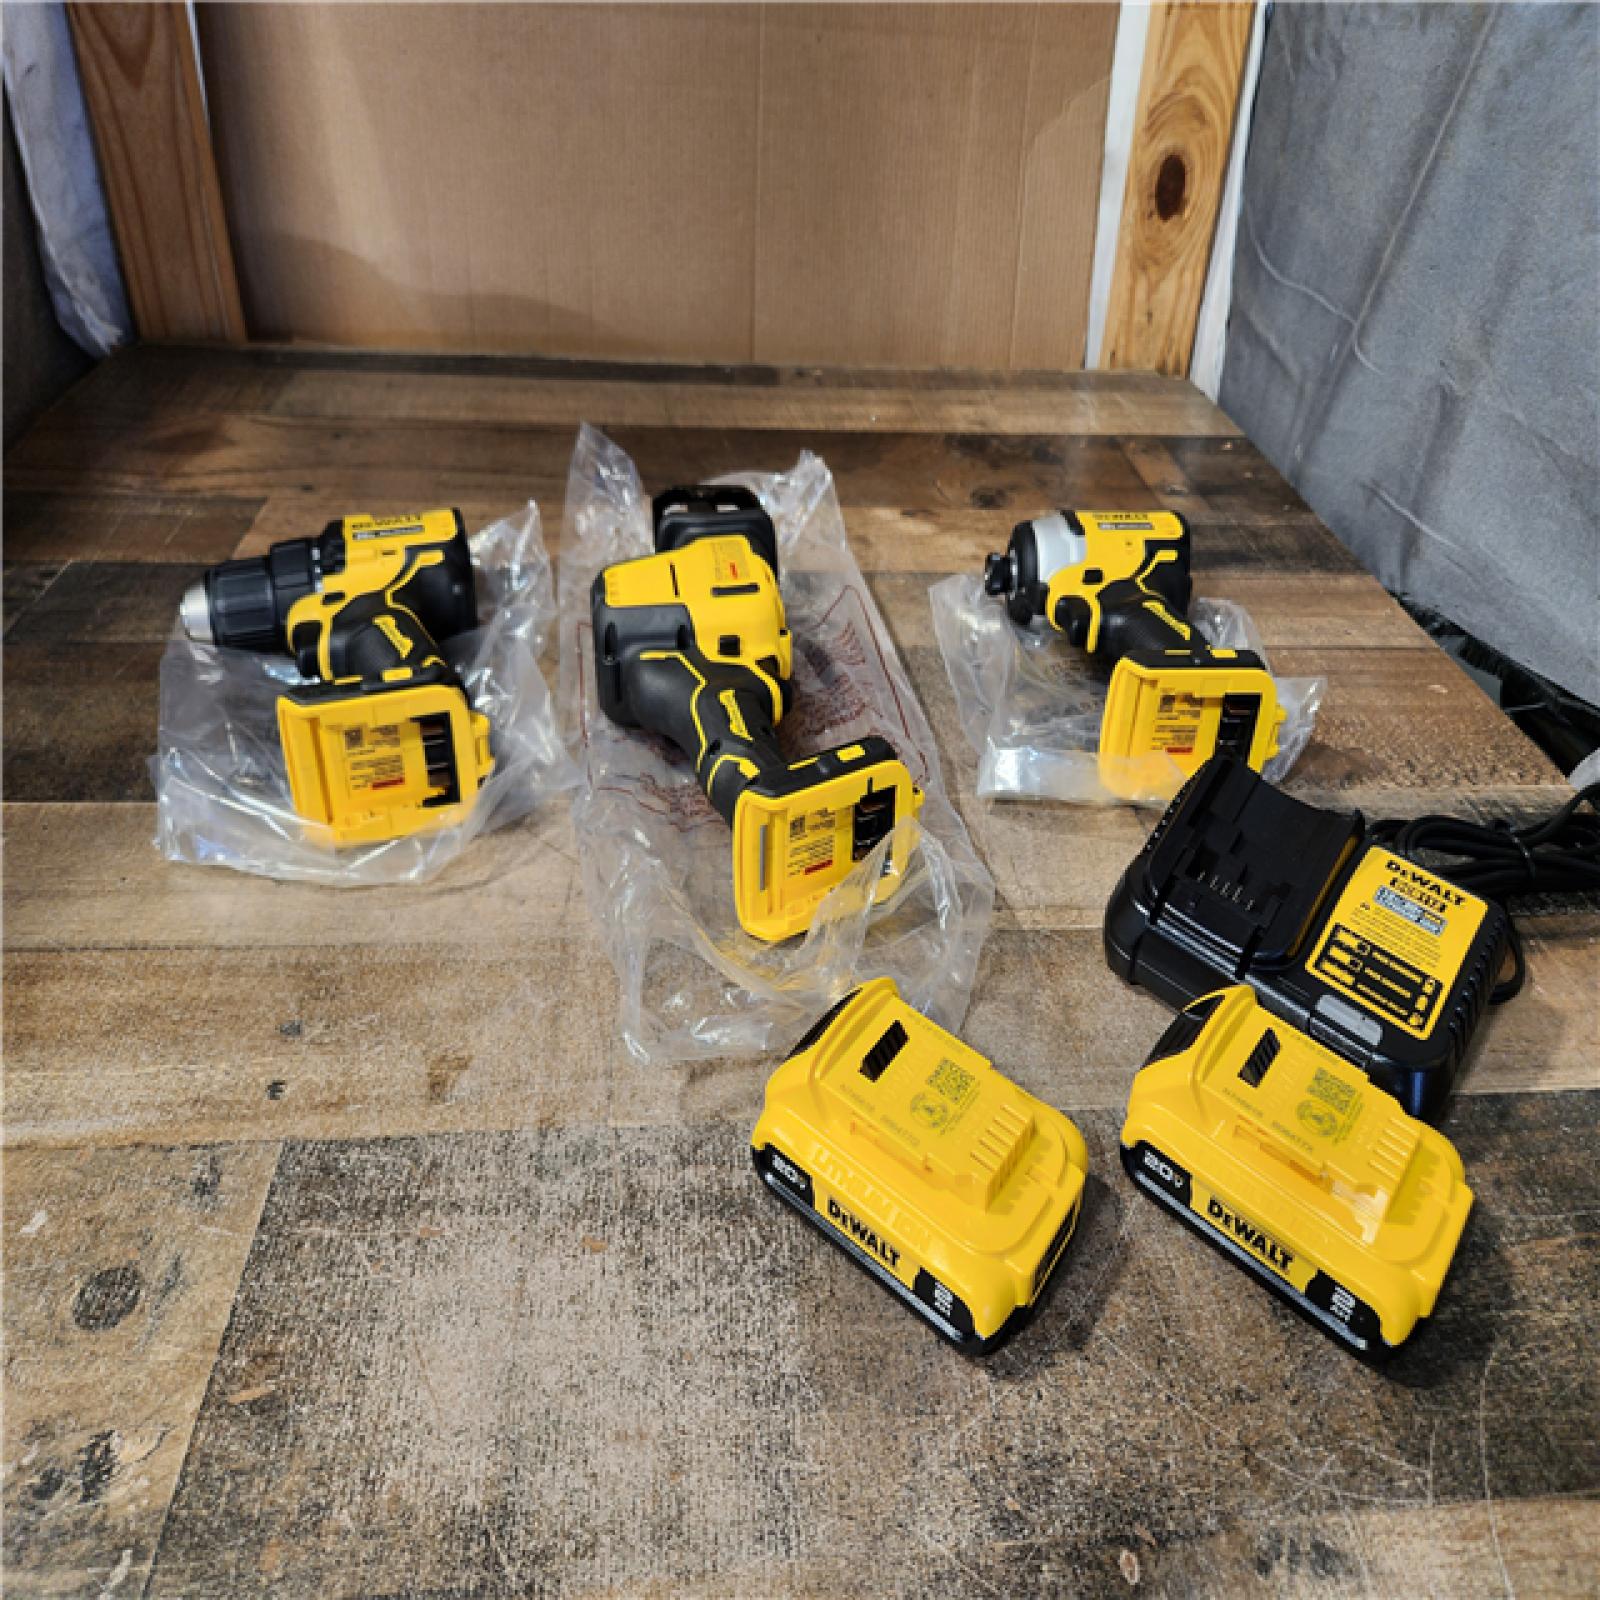 Houston Location - DeWalt 20V MAX ATOMIC Cordless Brushless 3 Tool Combo Kit - Appears In GOOD Condition